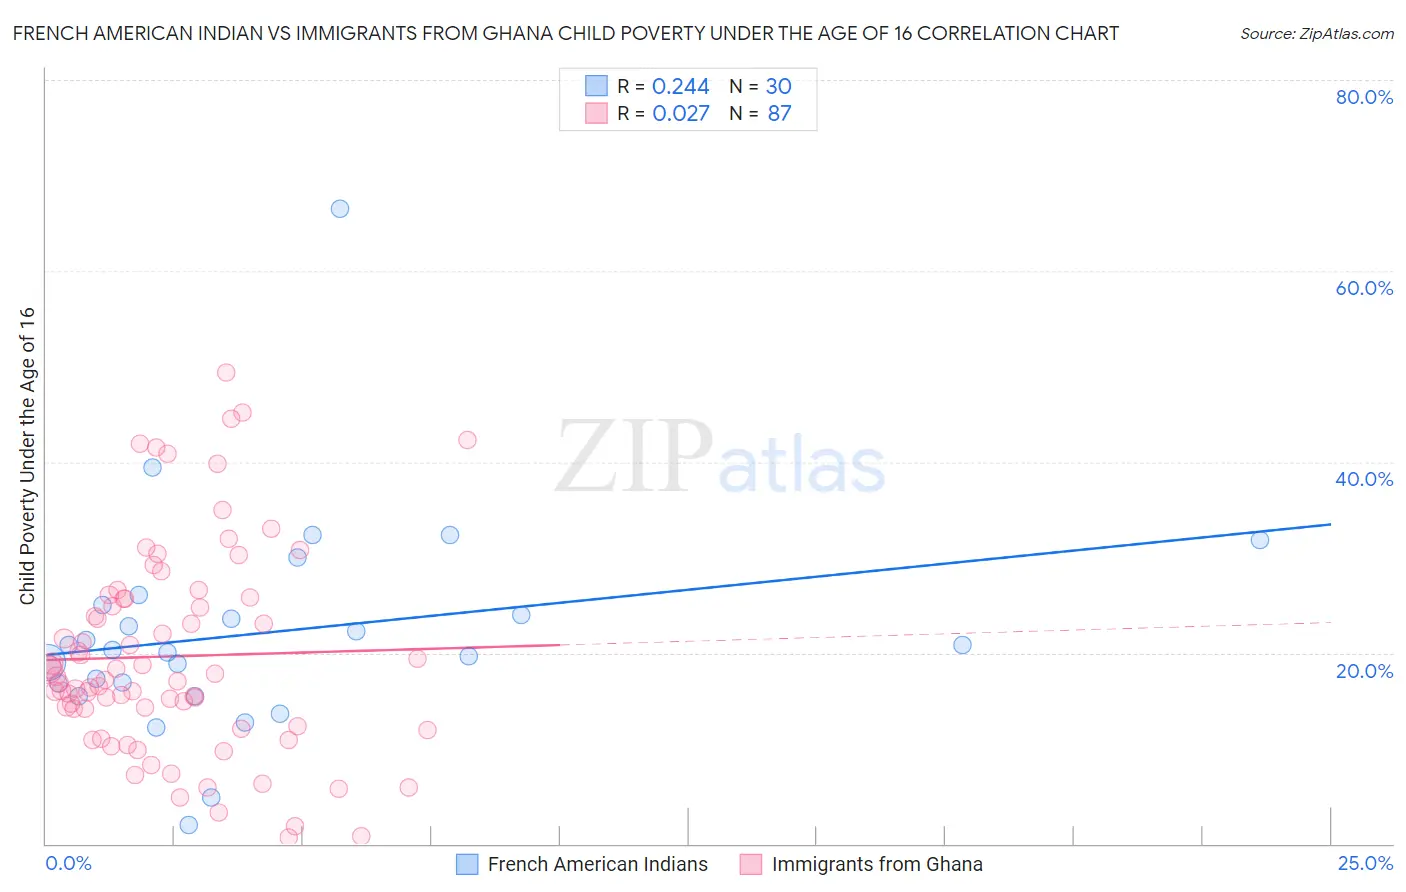 French American Indian vs Immigrants from Ghana Child Poverty Under the Age of 16